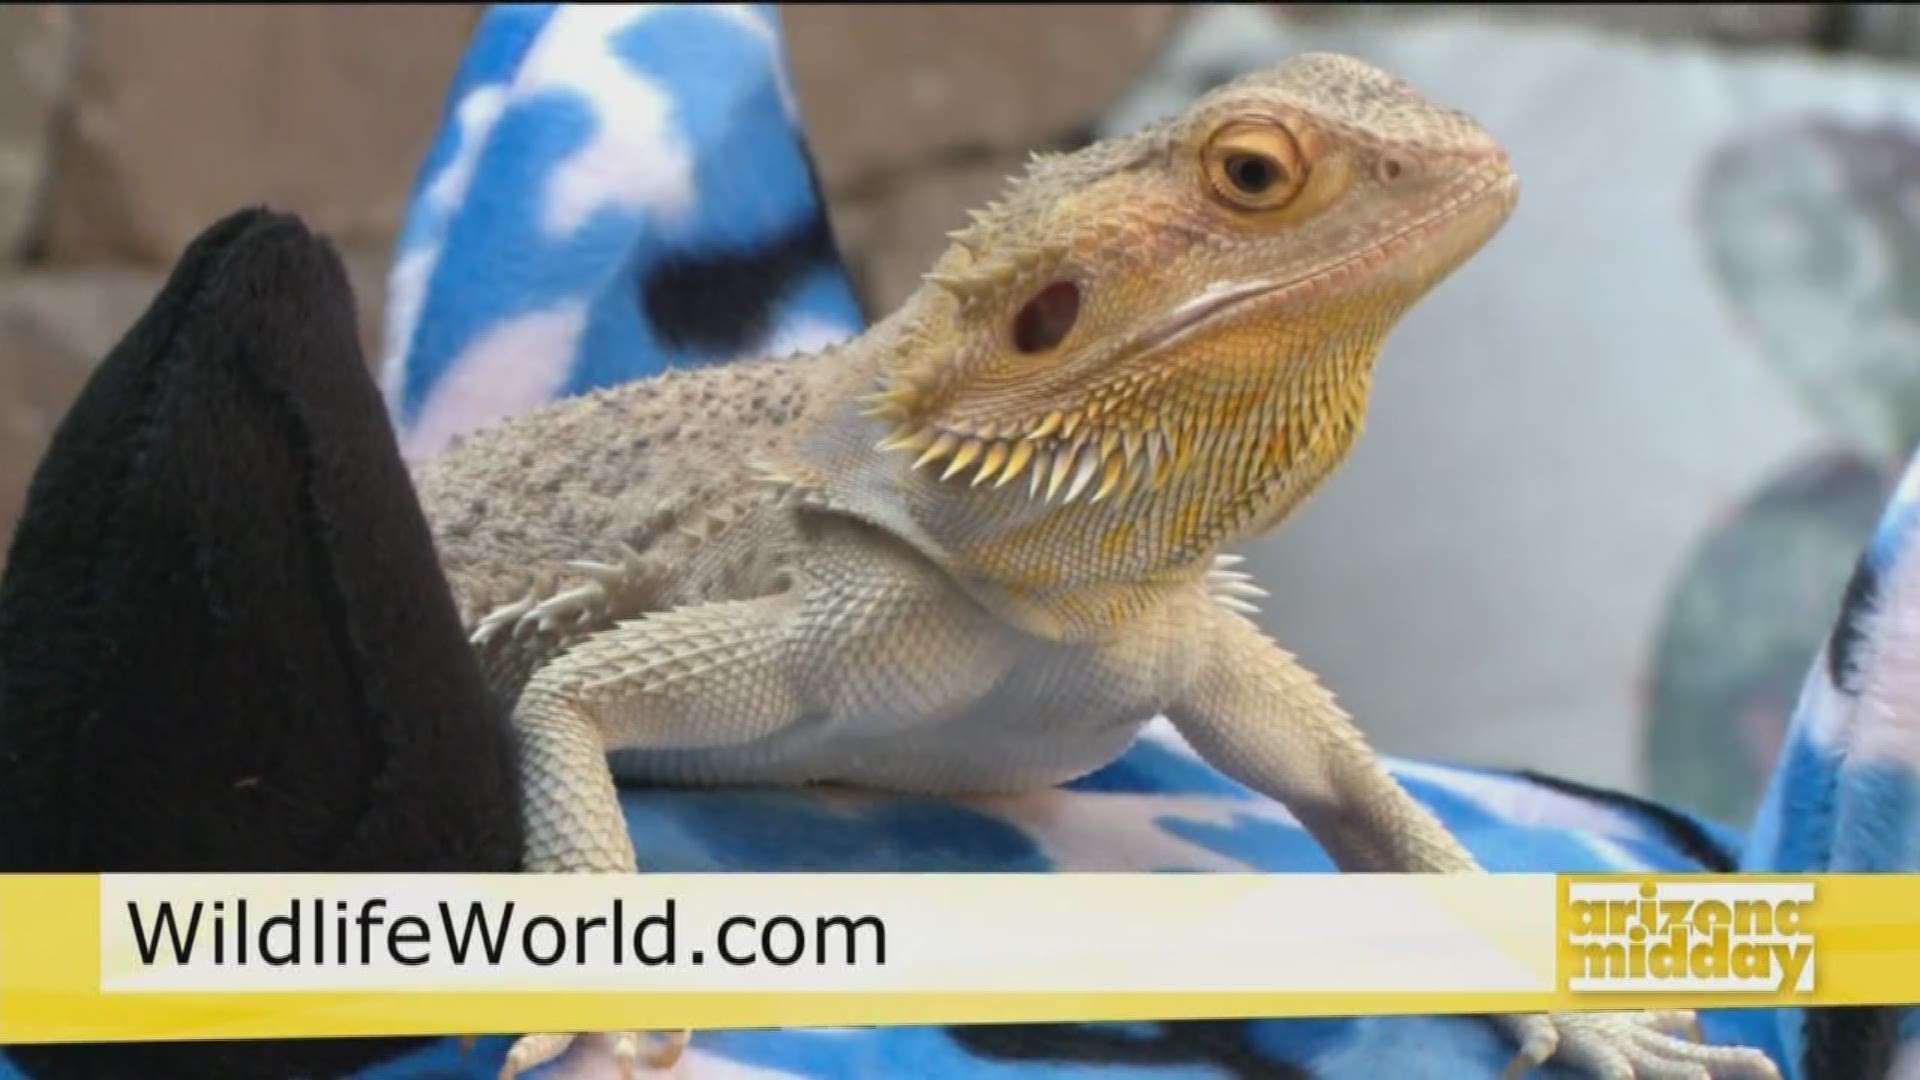 Kristy Morcom brings in Jarvis the Bearded Dragon from the Wildlife World Zoo, Aquarium & Safari Park and tells us how we can ride around the zoo with Rydables